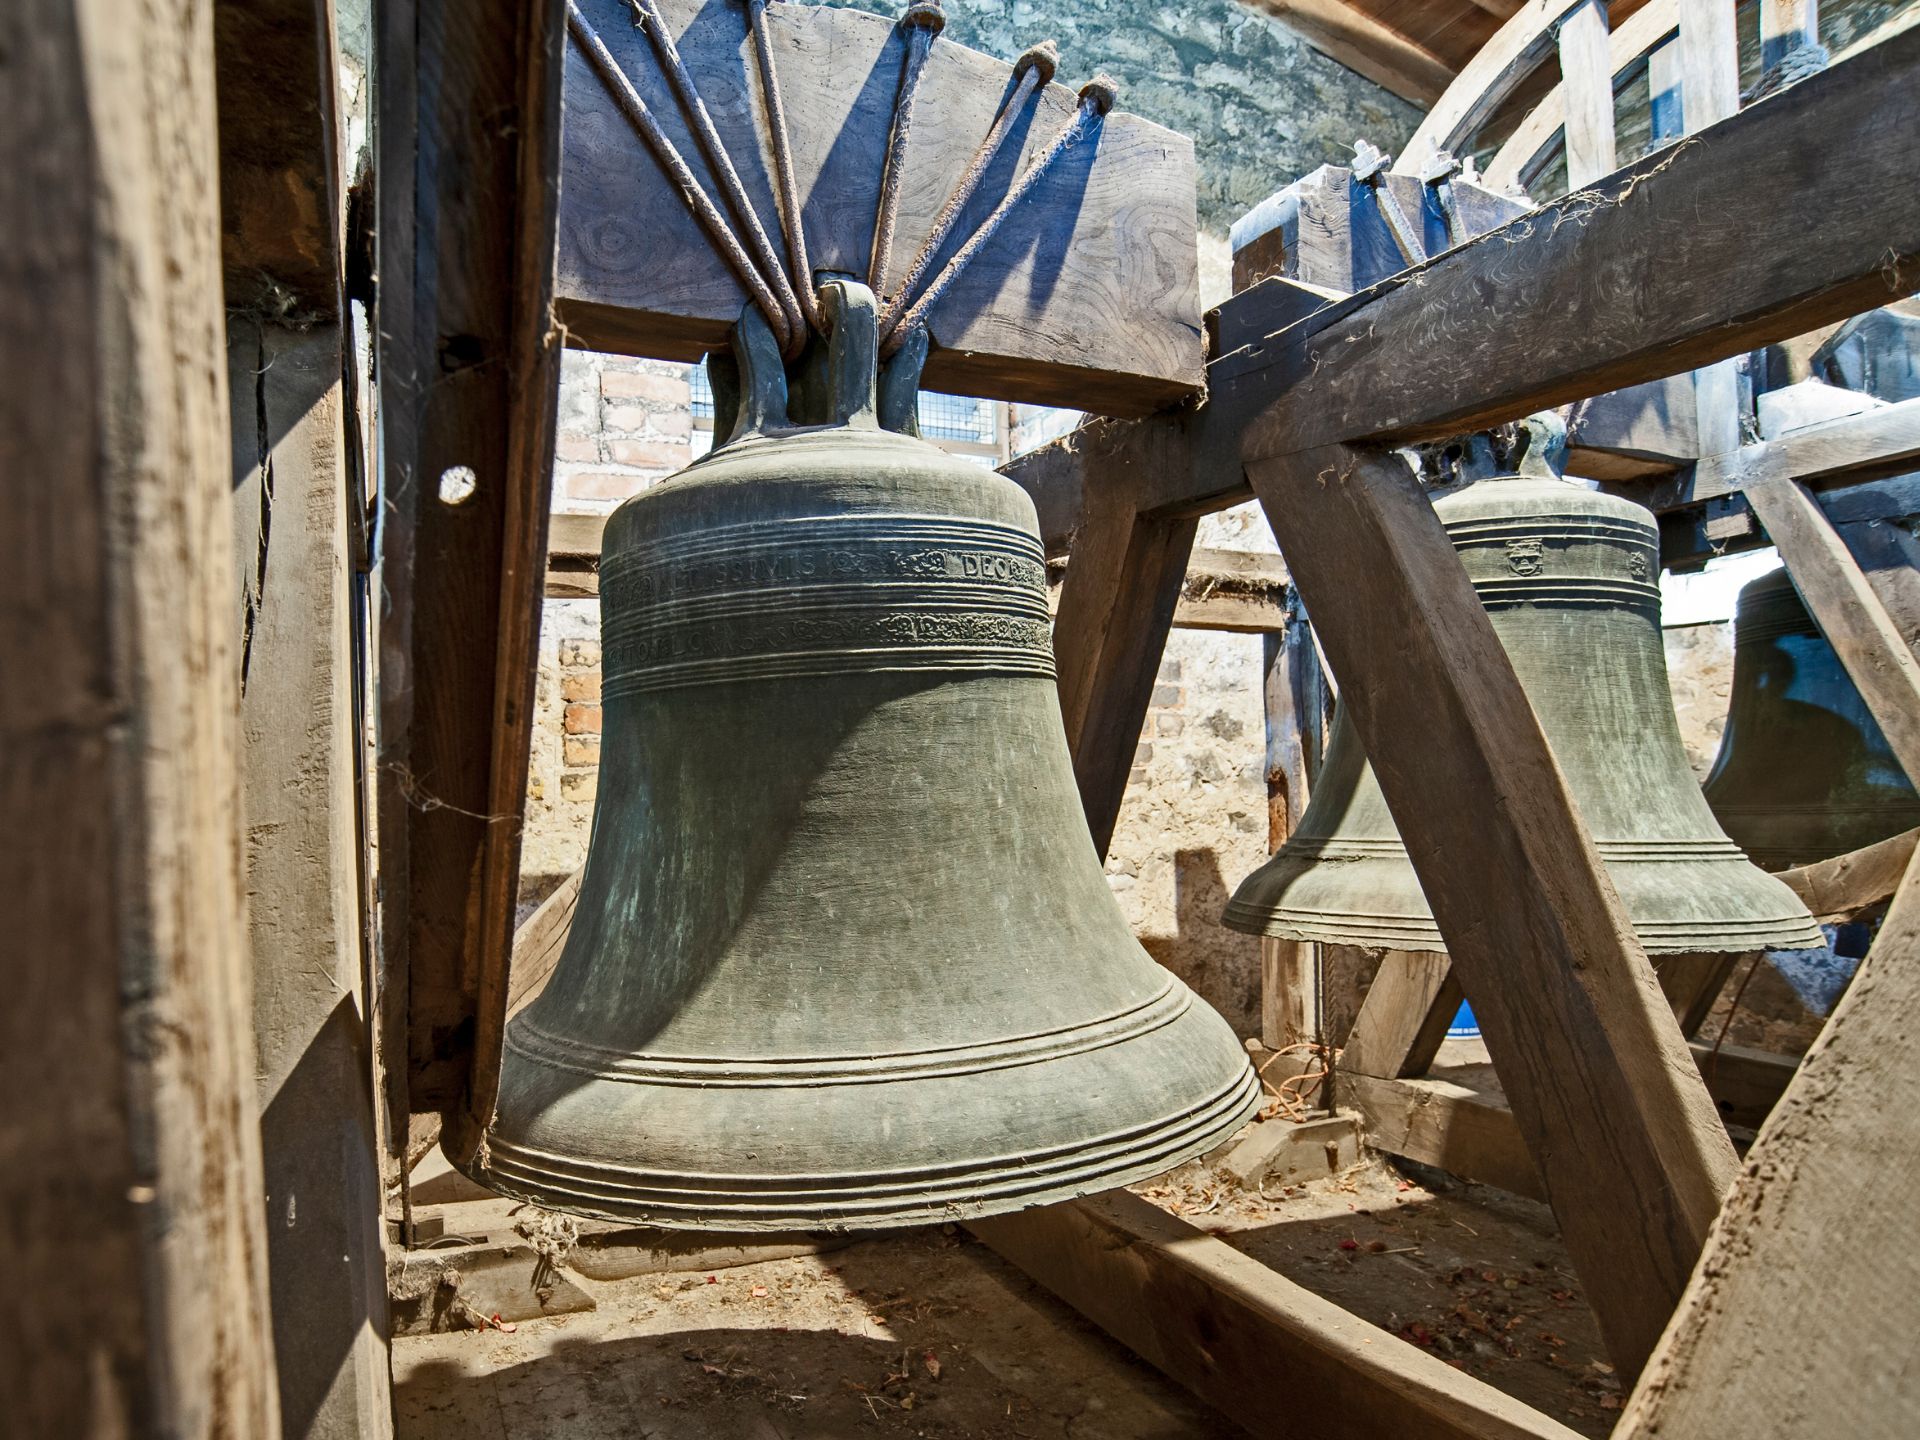 A large bell hangs from a wood structure